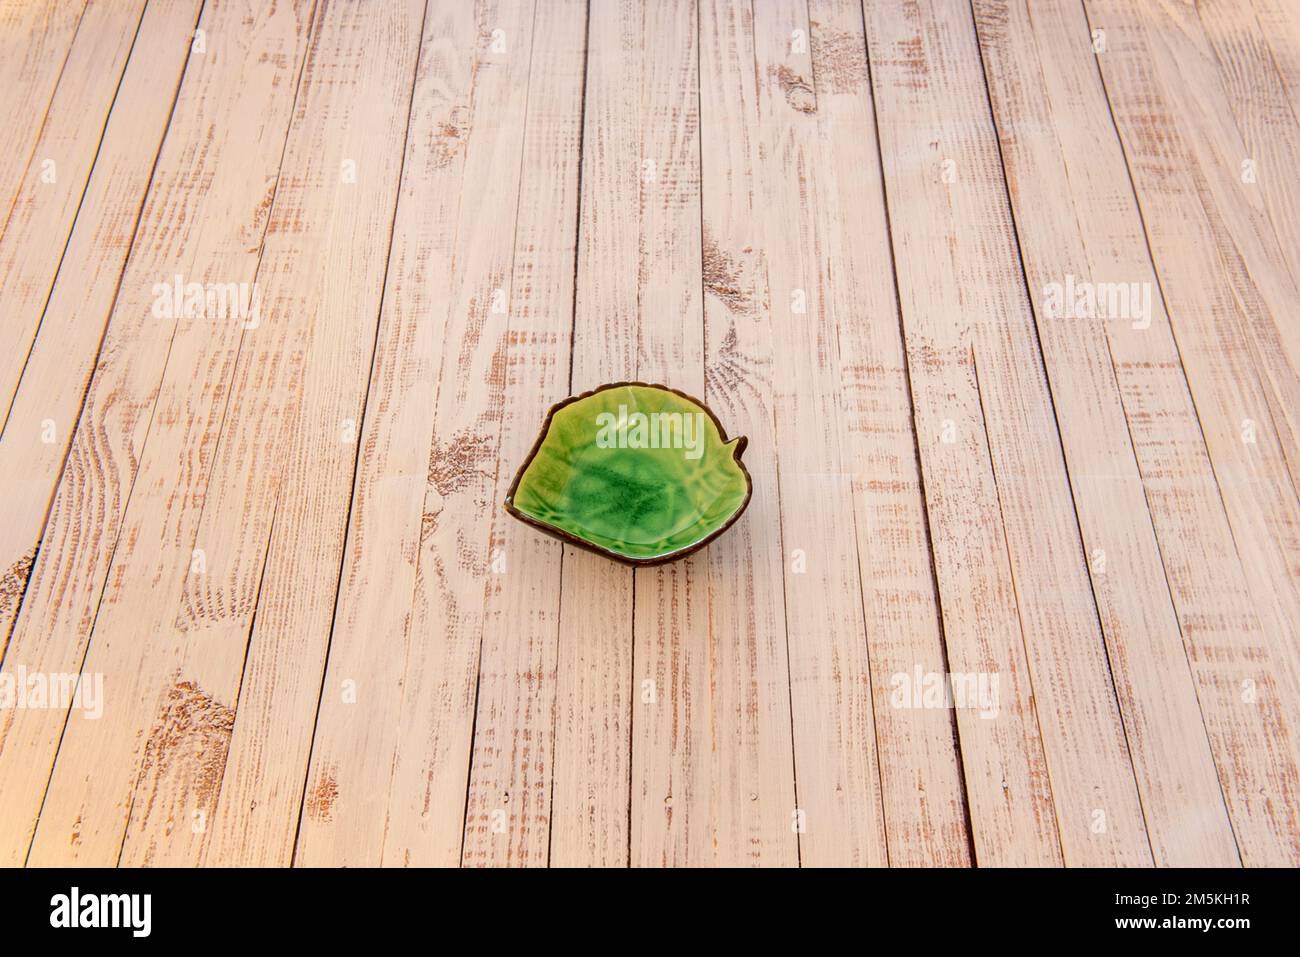 A pretty leaf green dip dish in the center of a wooden plank table Stock Photo